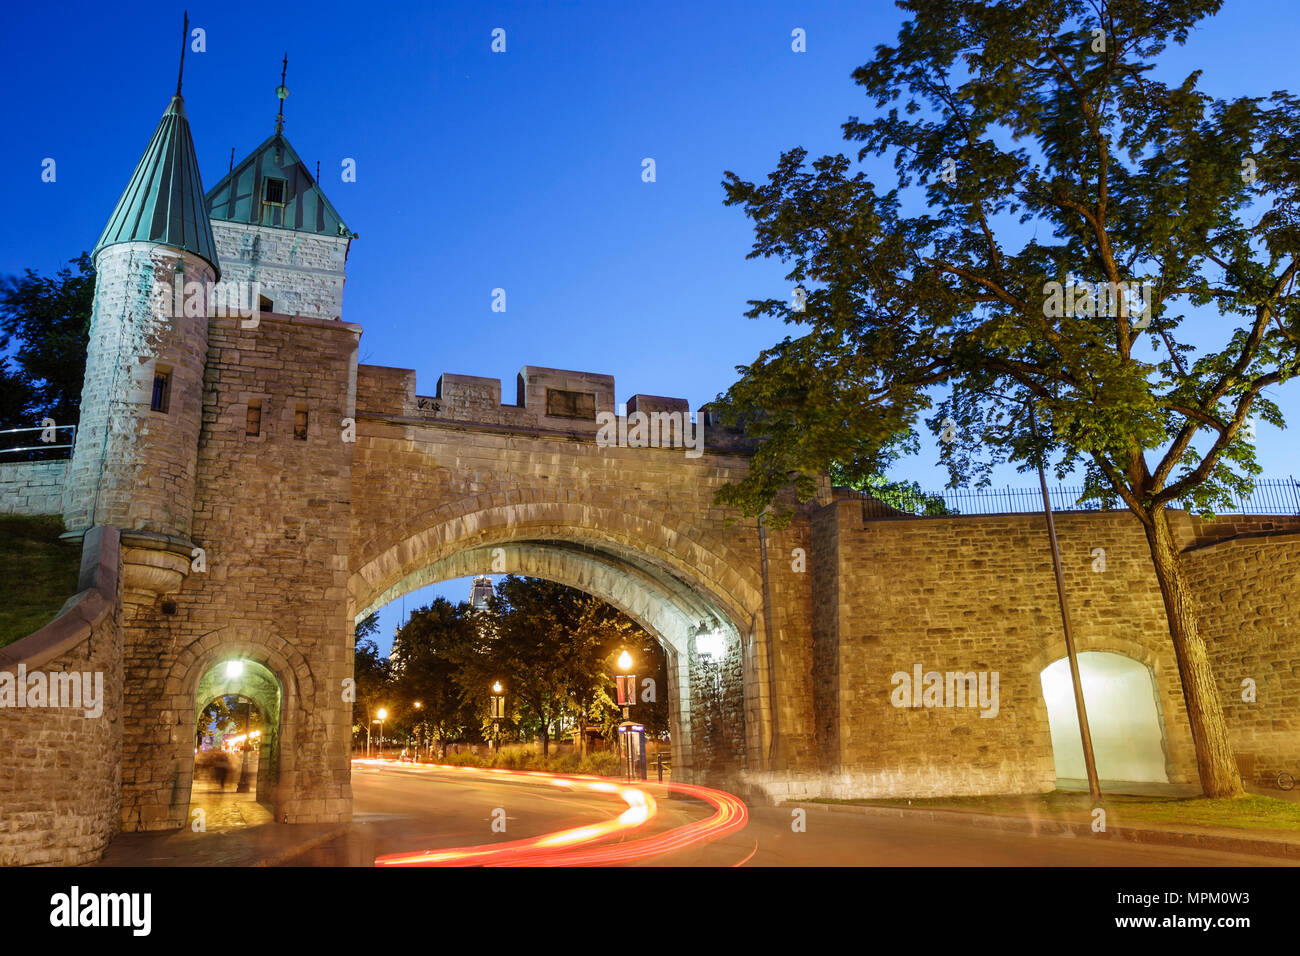 Quebec Canada,Grand Allee,city wall,fortification,dusk,evening,gate,gateway,Canada070712248 Stock Photo